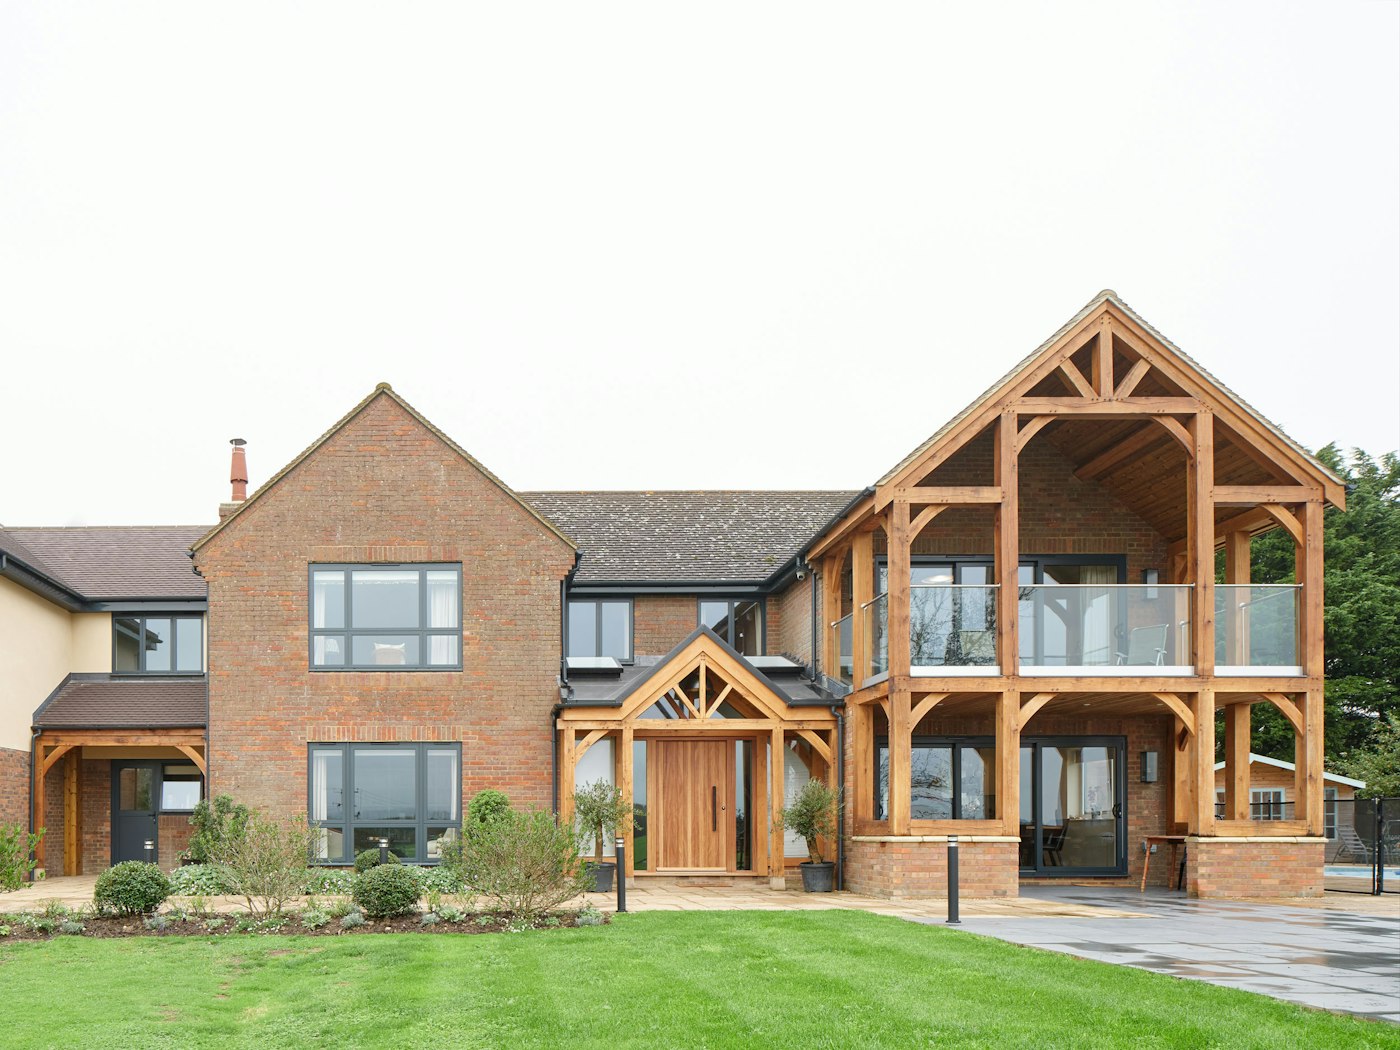 The house includes an impressive covered balcony with oak beams